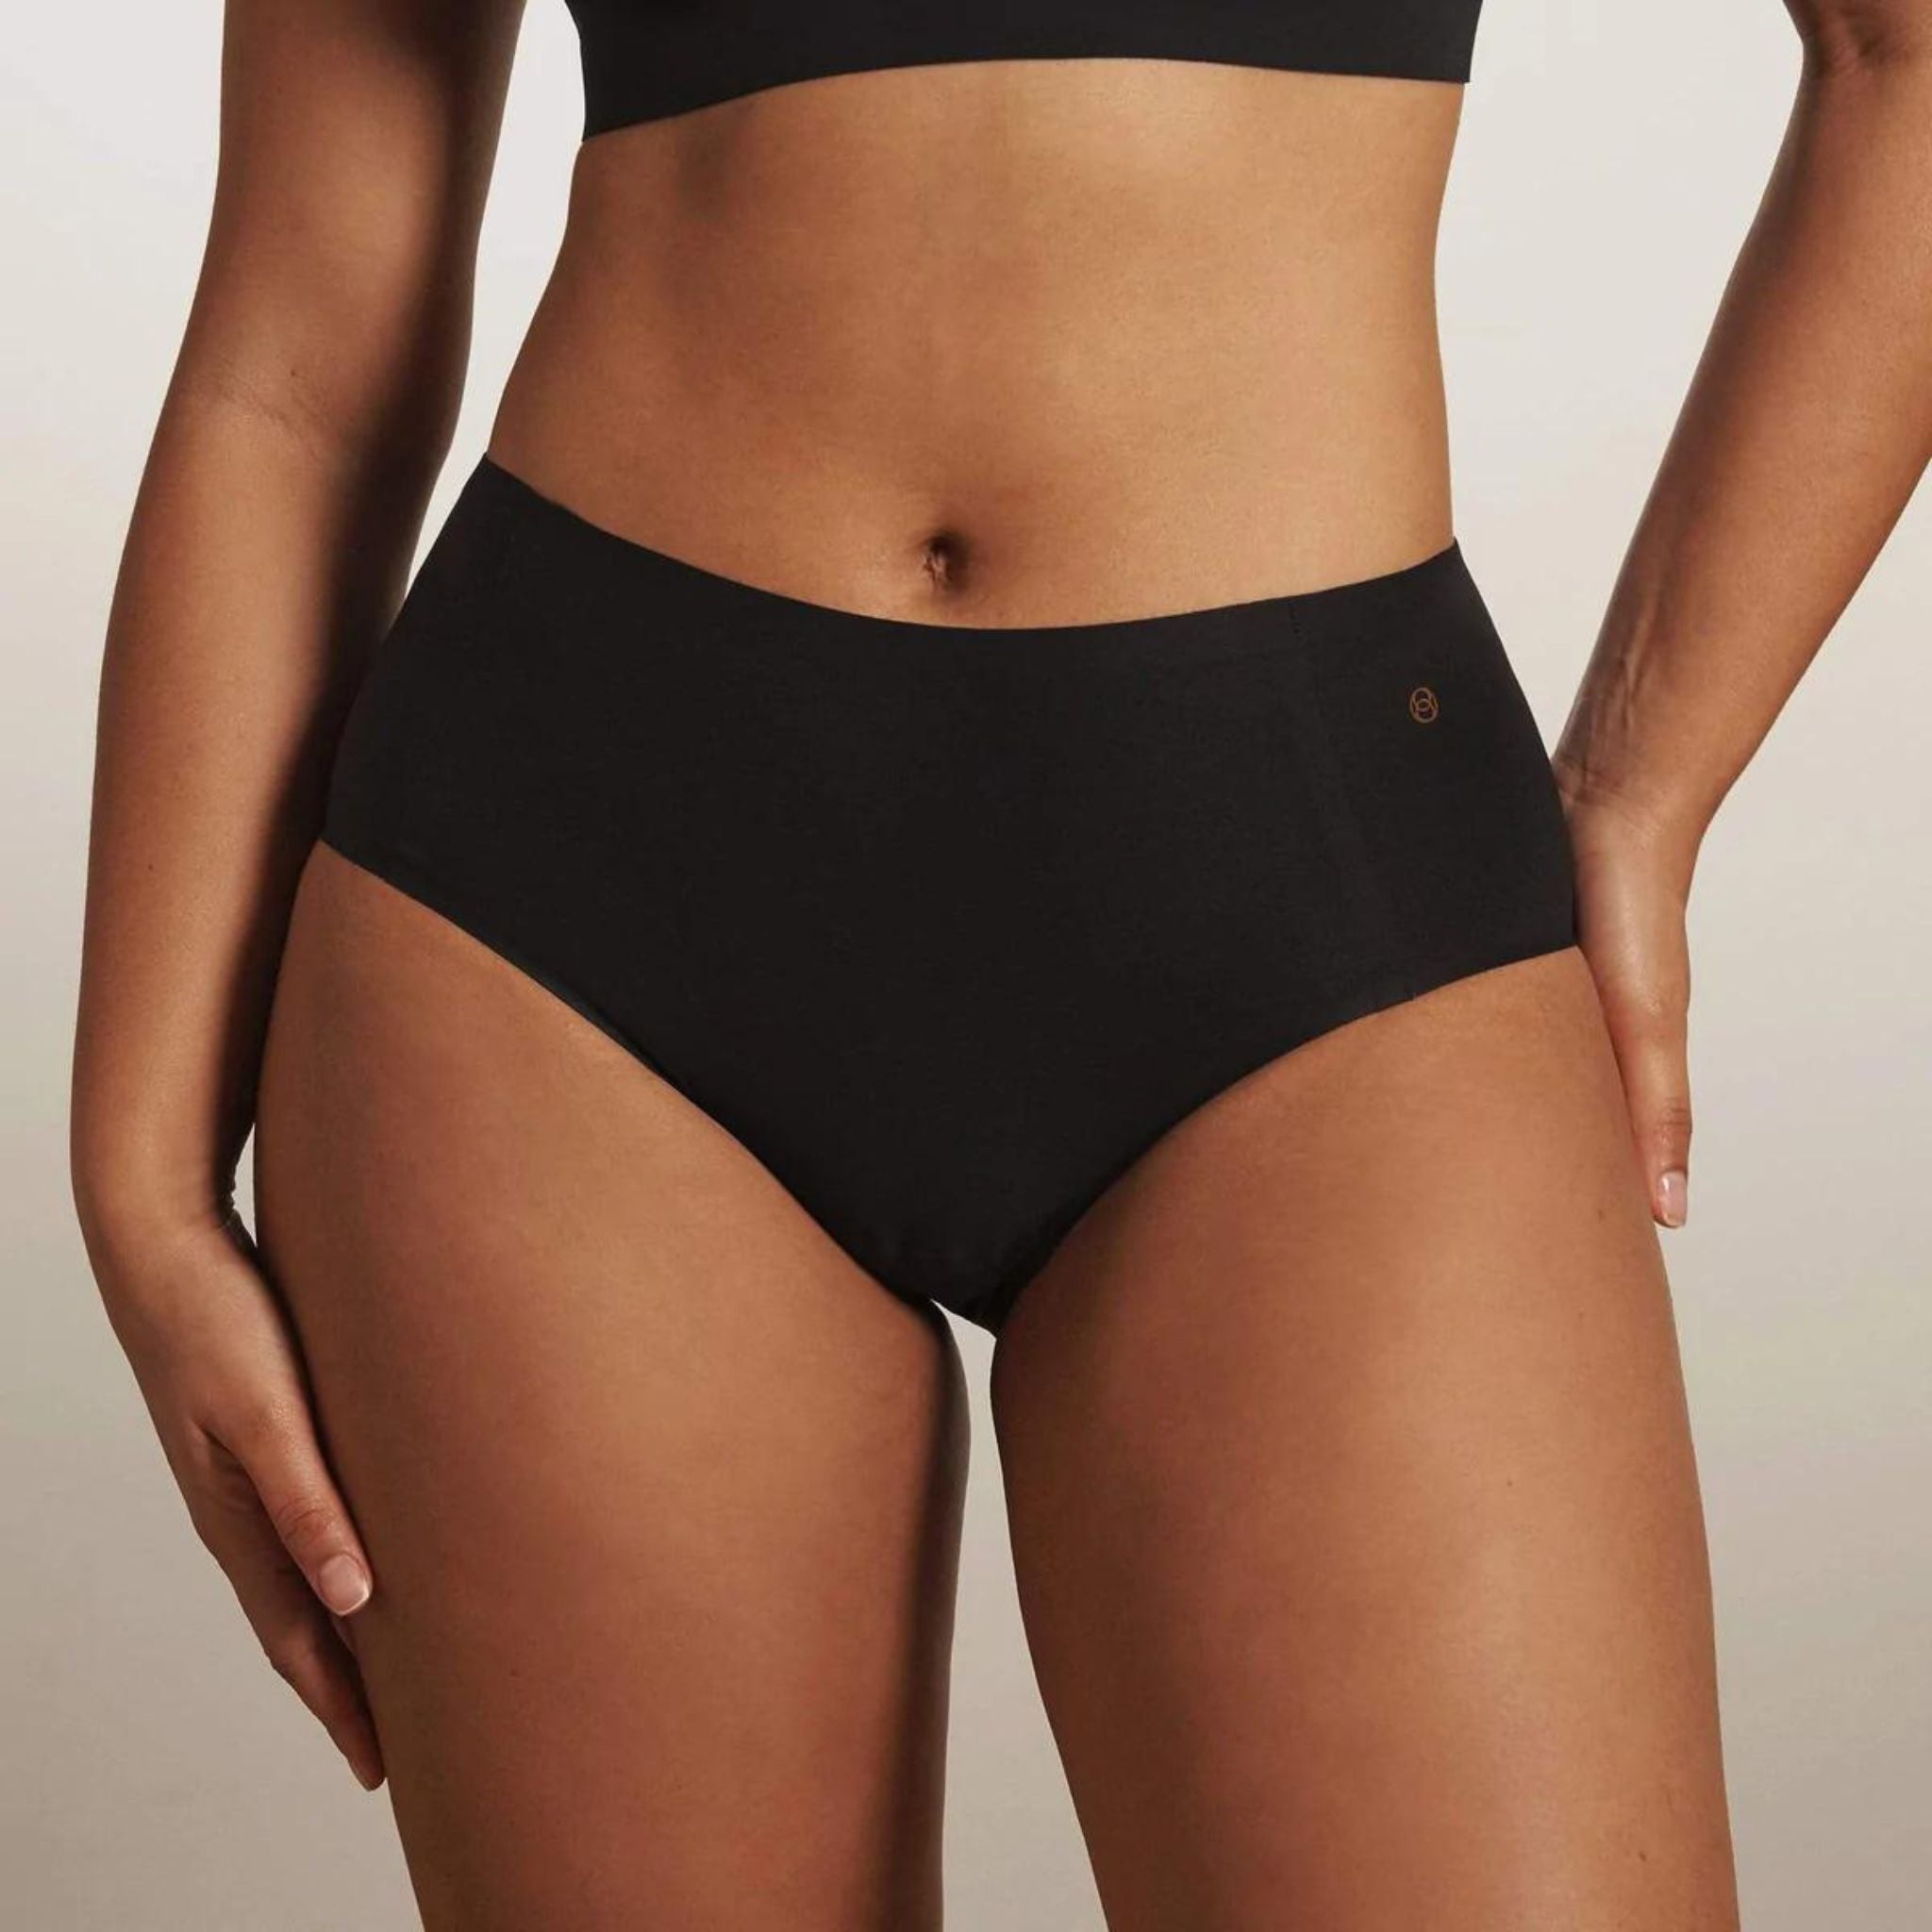 The famously comfortable Evelyn & Bobbie seamless underwear in classic, high-waisted style you'll love without the dreaded VPL (visible panty line). The most comfortable pair in your drawer, and invisible under everything. Even under leggings!